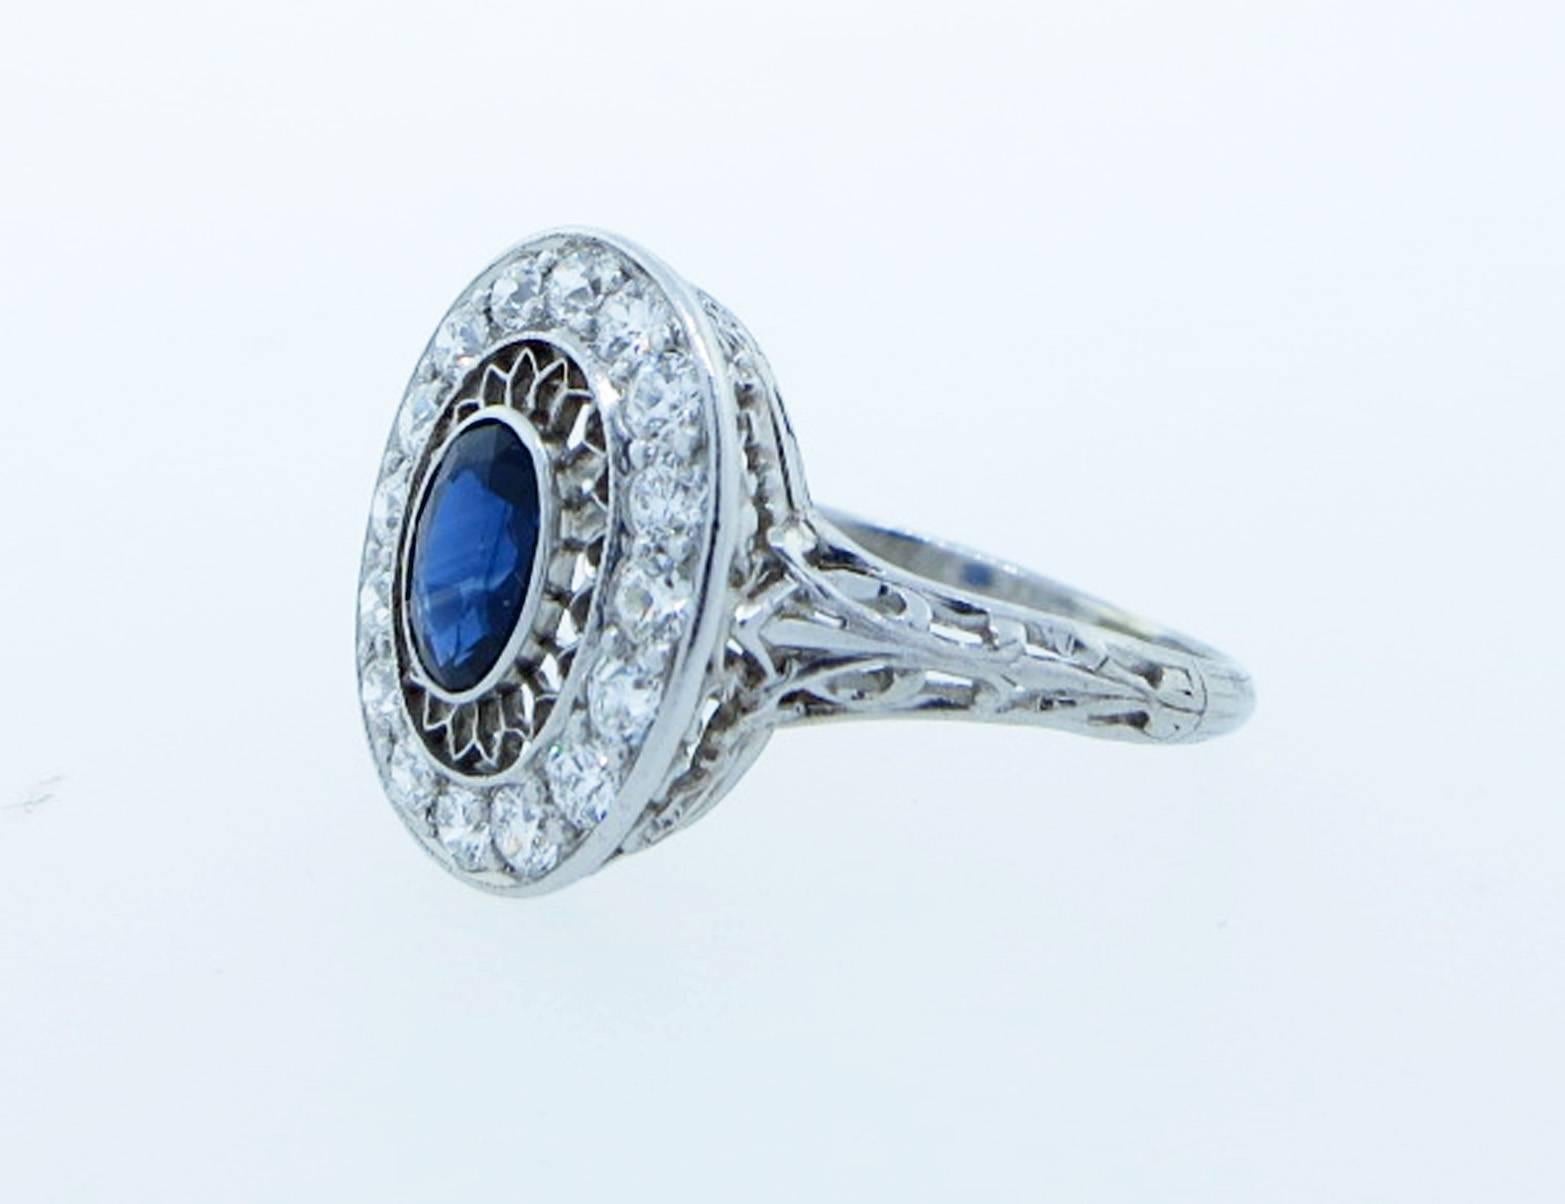 Exquisite antique Edwardian handmade platinum mount sapphire and diamond ring circa 1900. The floating center is bezel set with a fine blue oval faceted natural sapphire weighing approx .60cts. The lacey engraved mount is bead set with 16 round